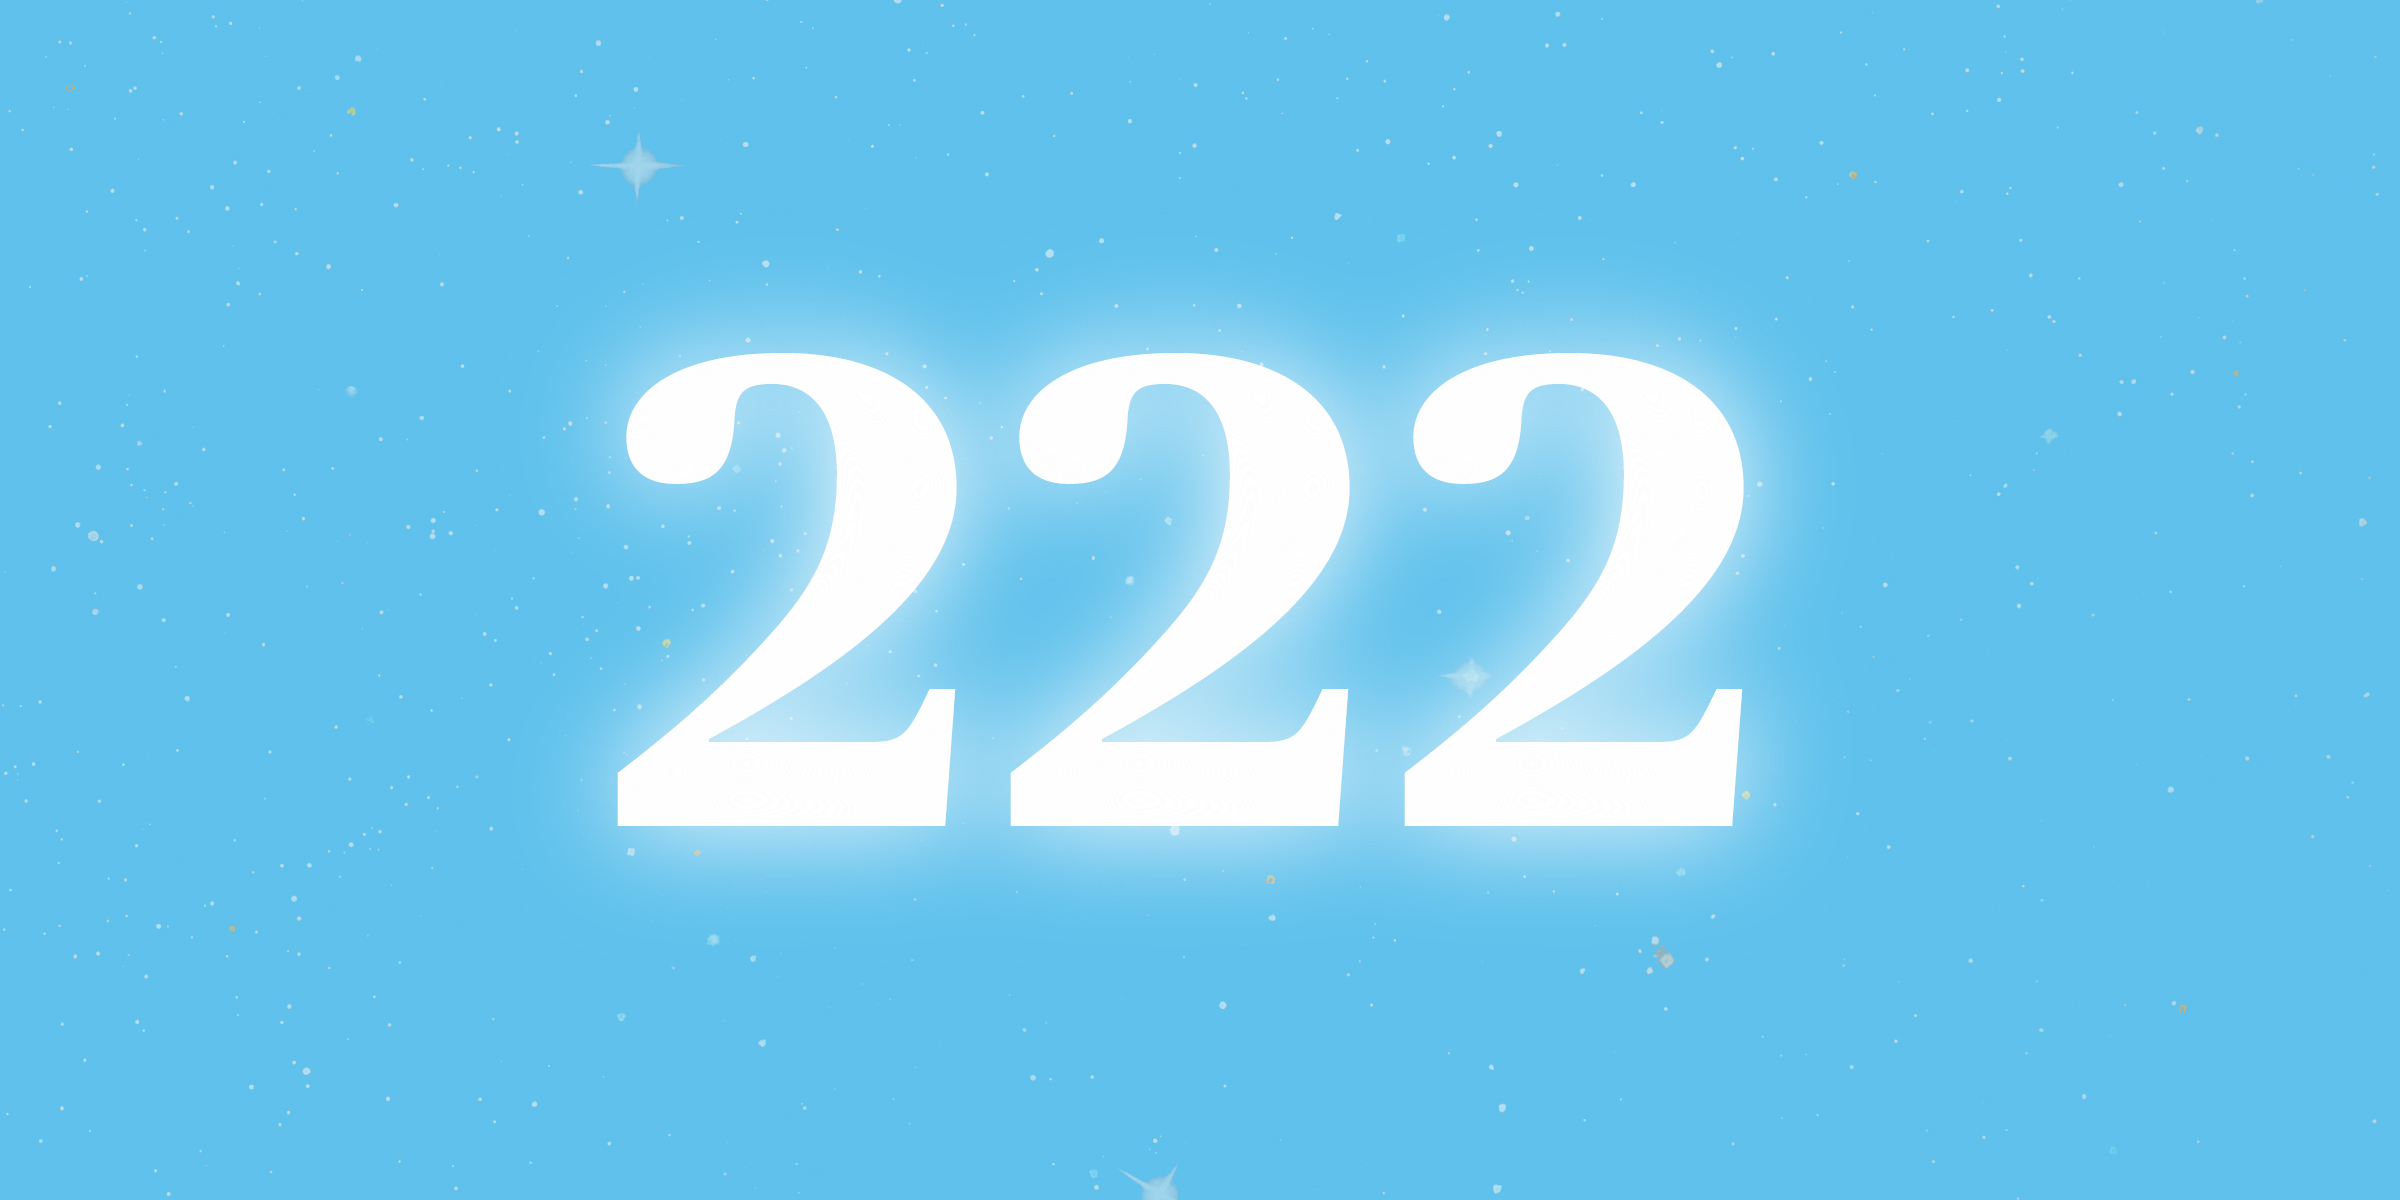 Angel Number 222 - What Does These Numbers Mean?